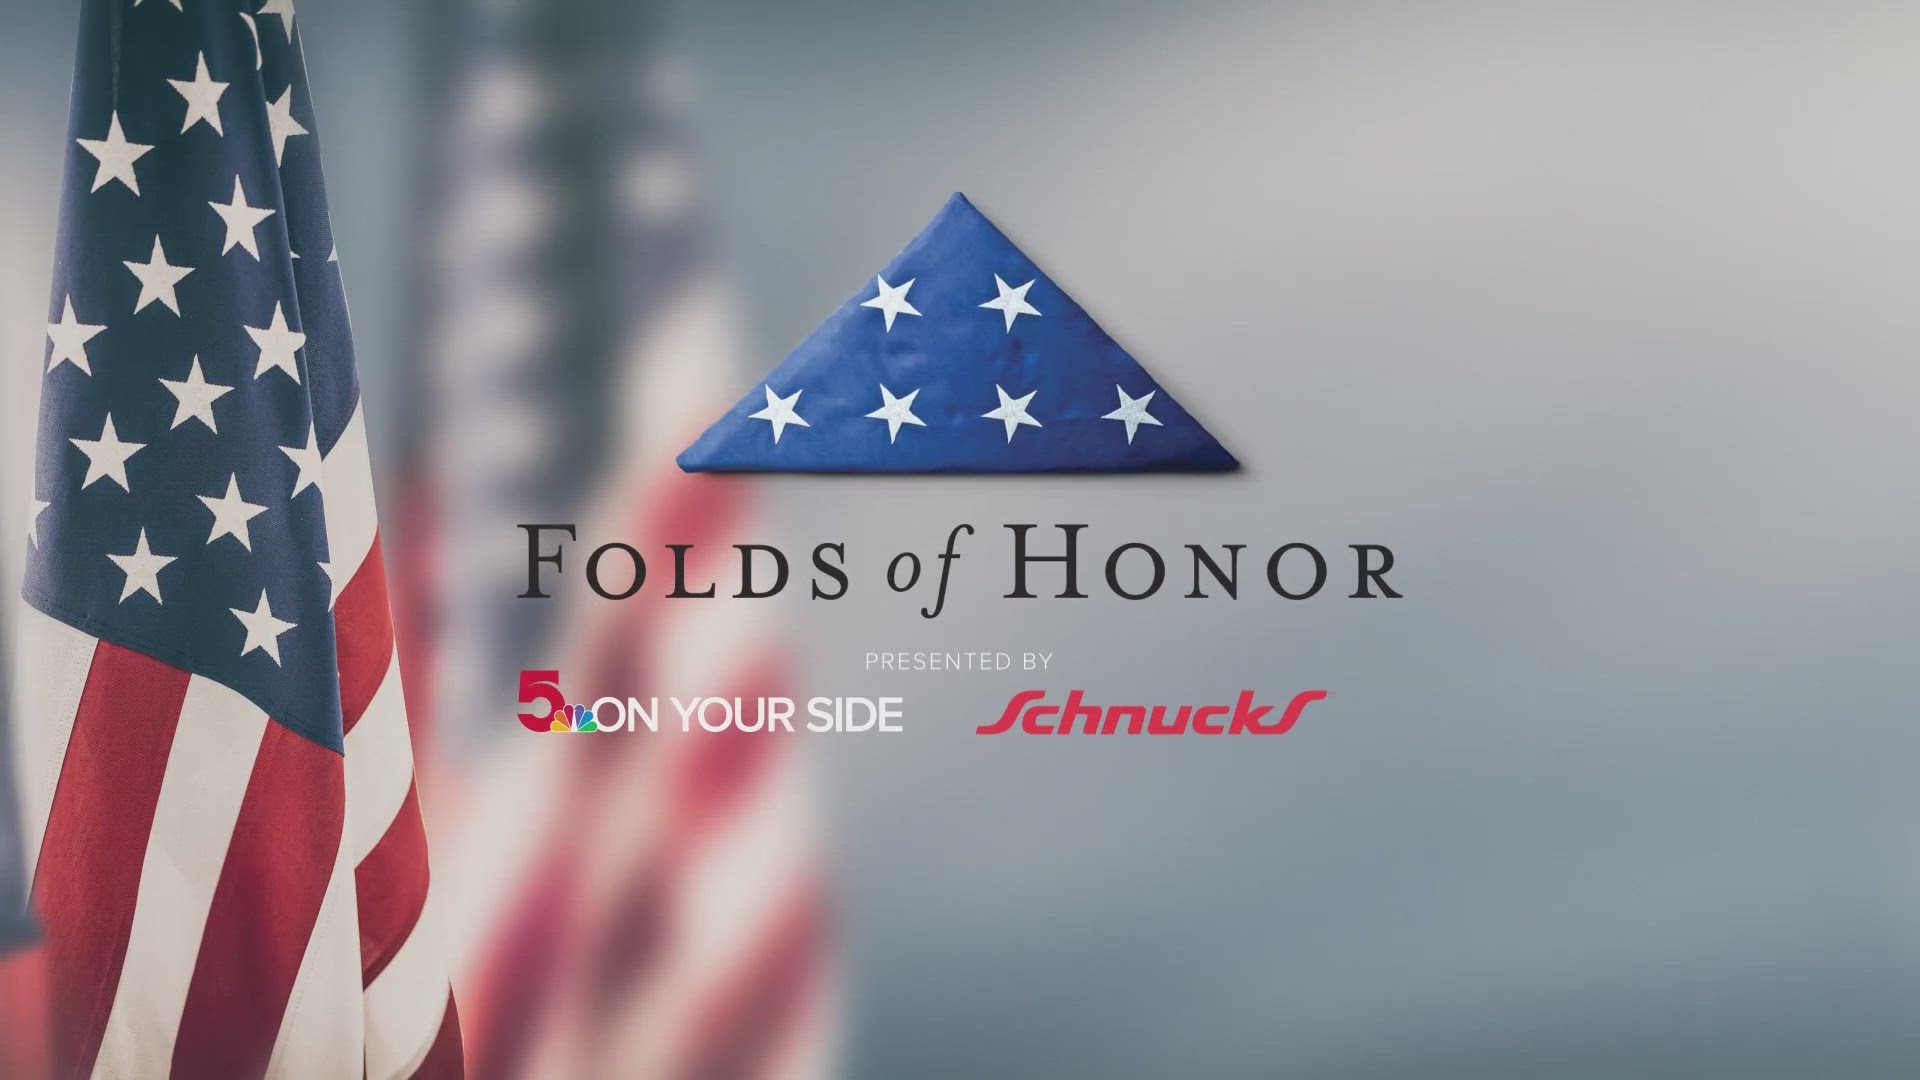 Shopped at Schnucks lately? You may have noticed they are collecting money for Folds of Honor. Scholarship recipient shares how he is following his dad's footsteps.